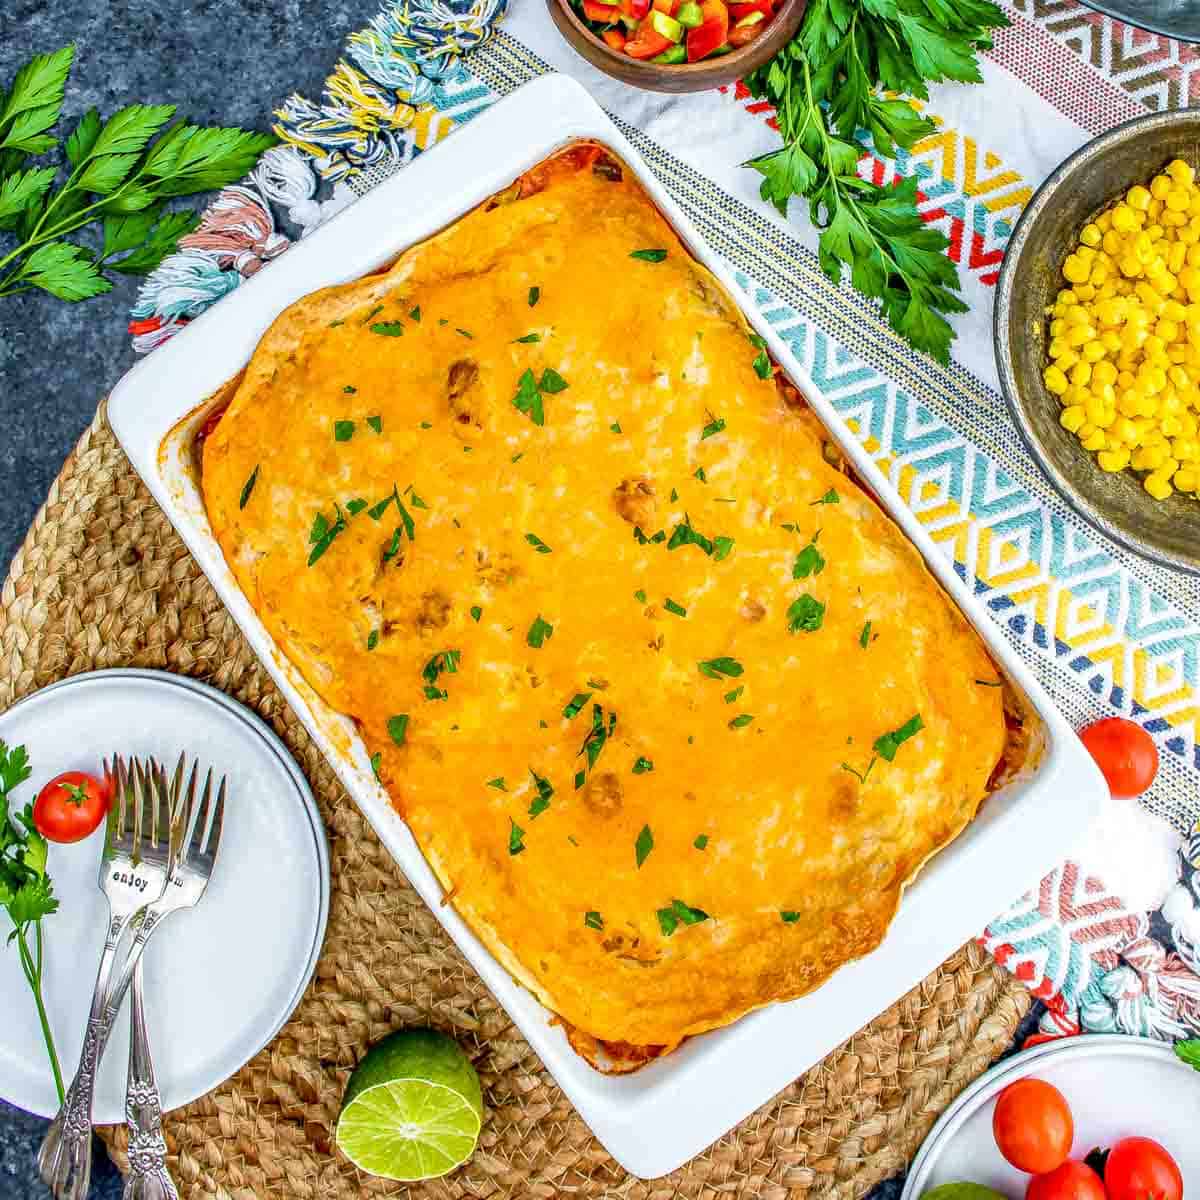 Overhead view of a homemade Chicken Tortilla Casserole in a white dish surrounded by fresh herbs, a bowl of corn, and salad, served on a colorful tablecloth.